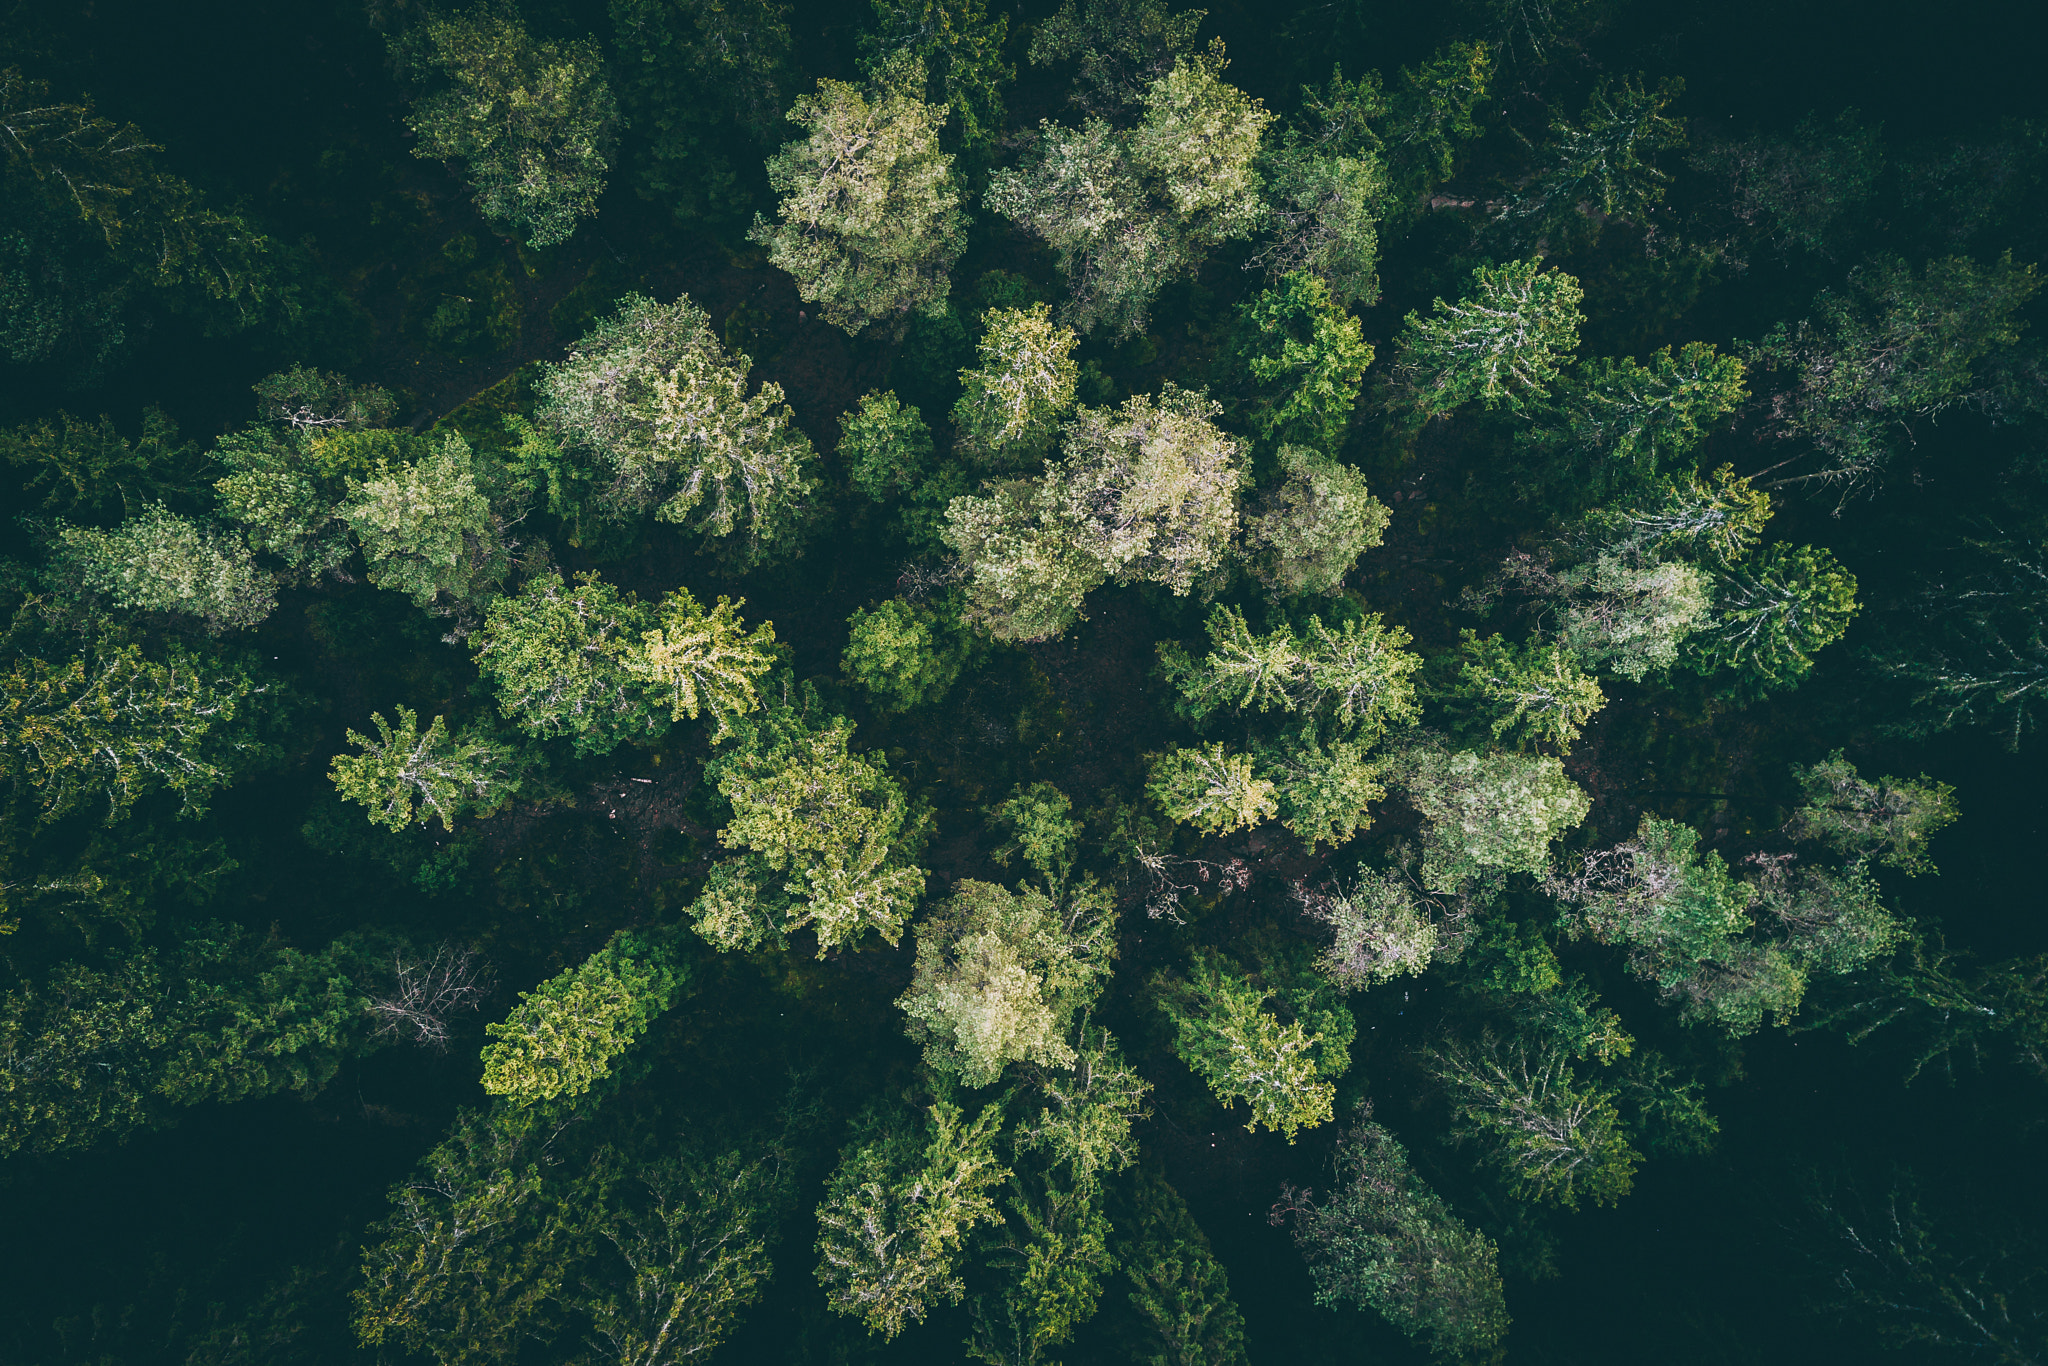 General 2048x1366 landscape wood forest drone photo